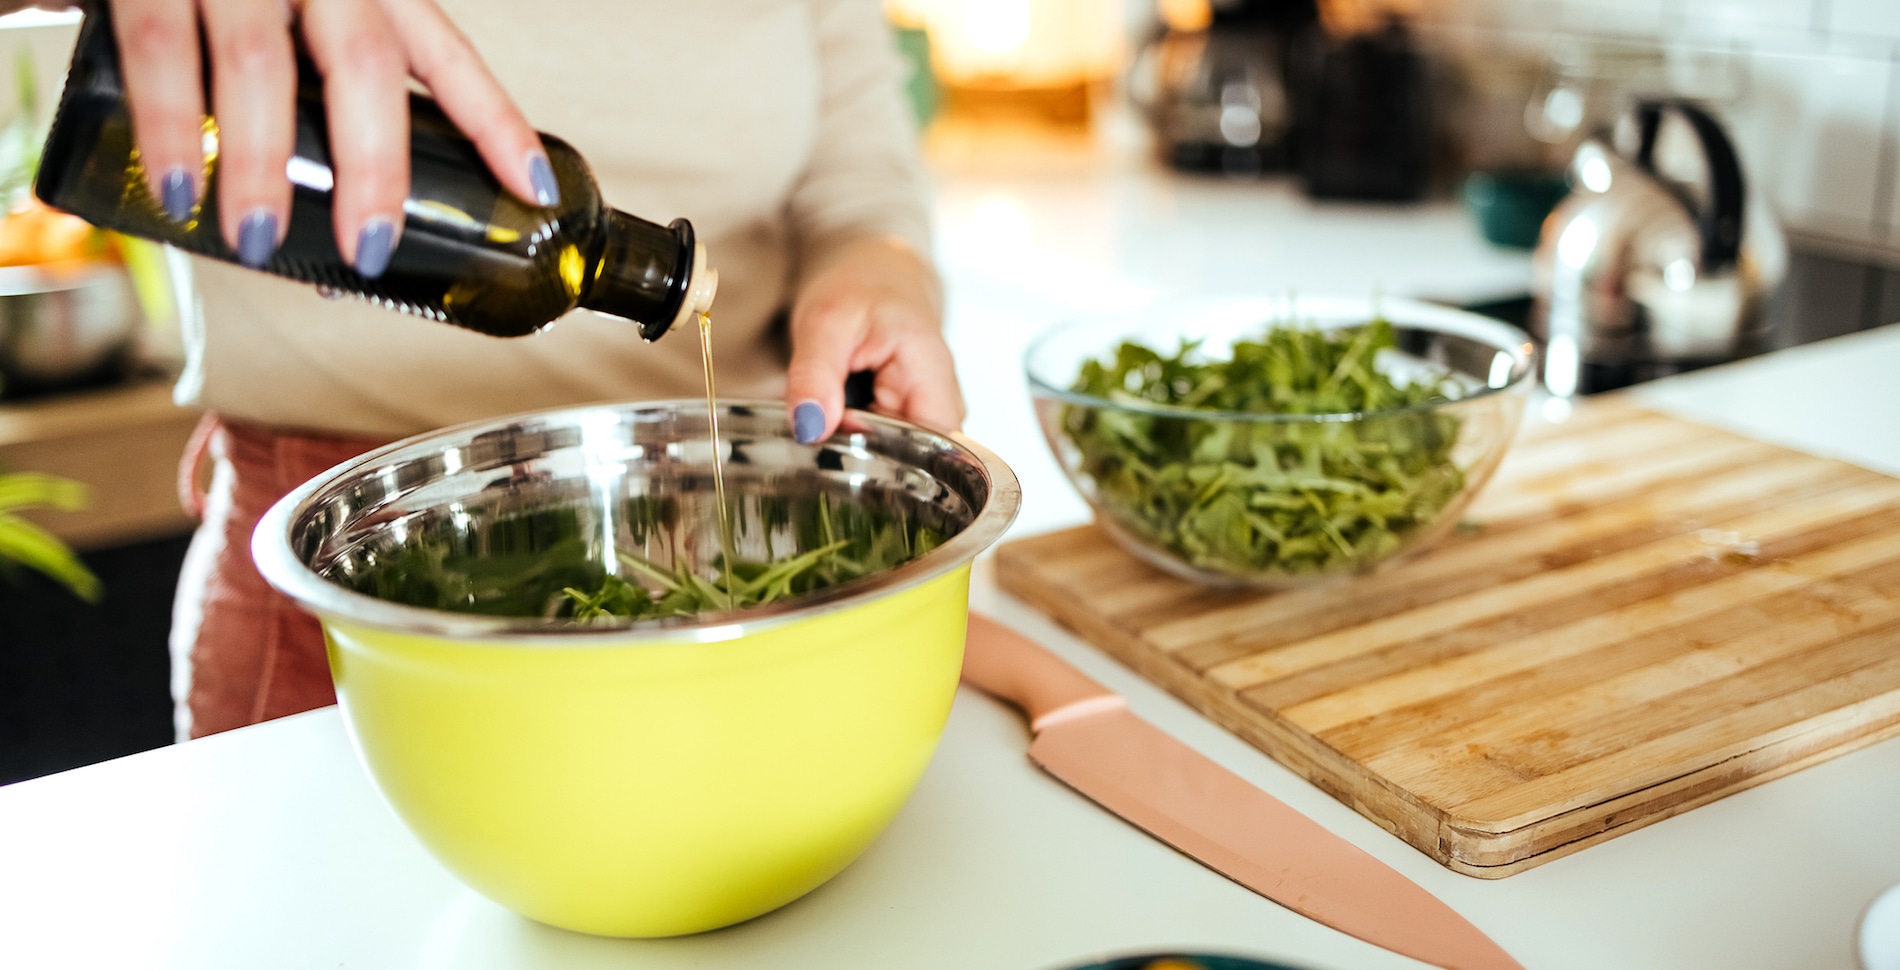 From Olive to Avocado, These Are the 5 Healthiest Cooking Oils You Need In Your Kitchen